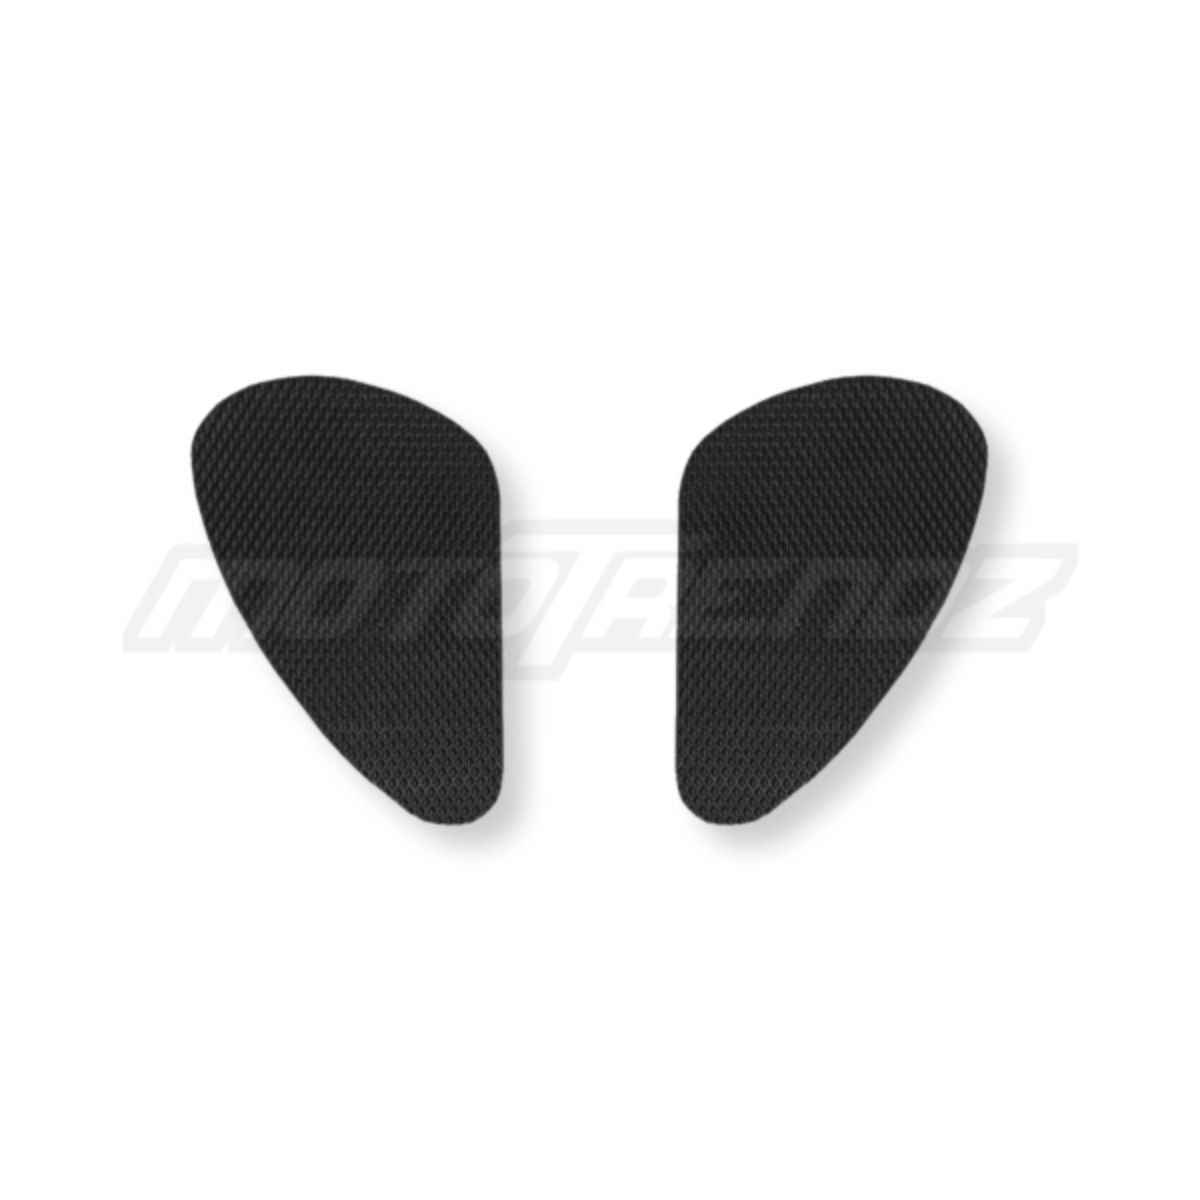 Traction Pads for Royal Enfield Classic/Bullet/Reborn 4